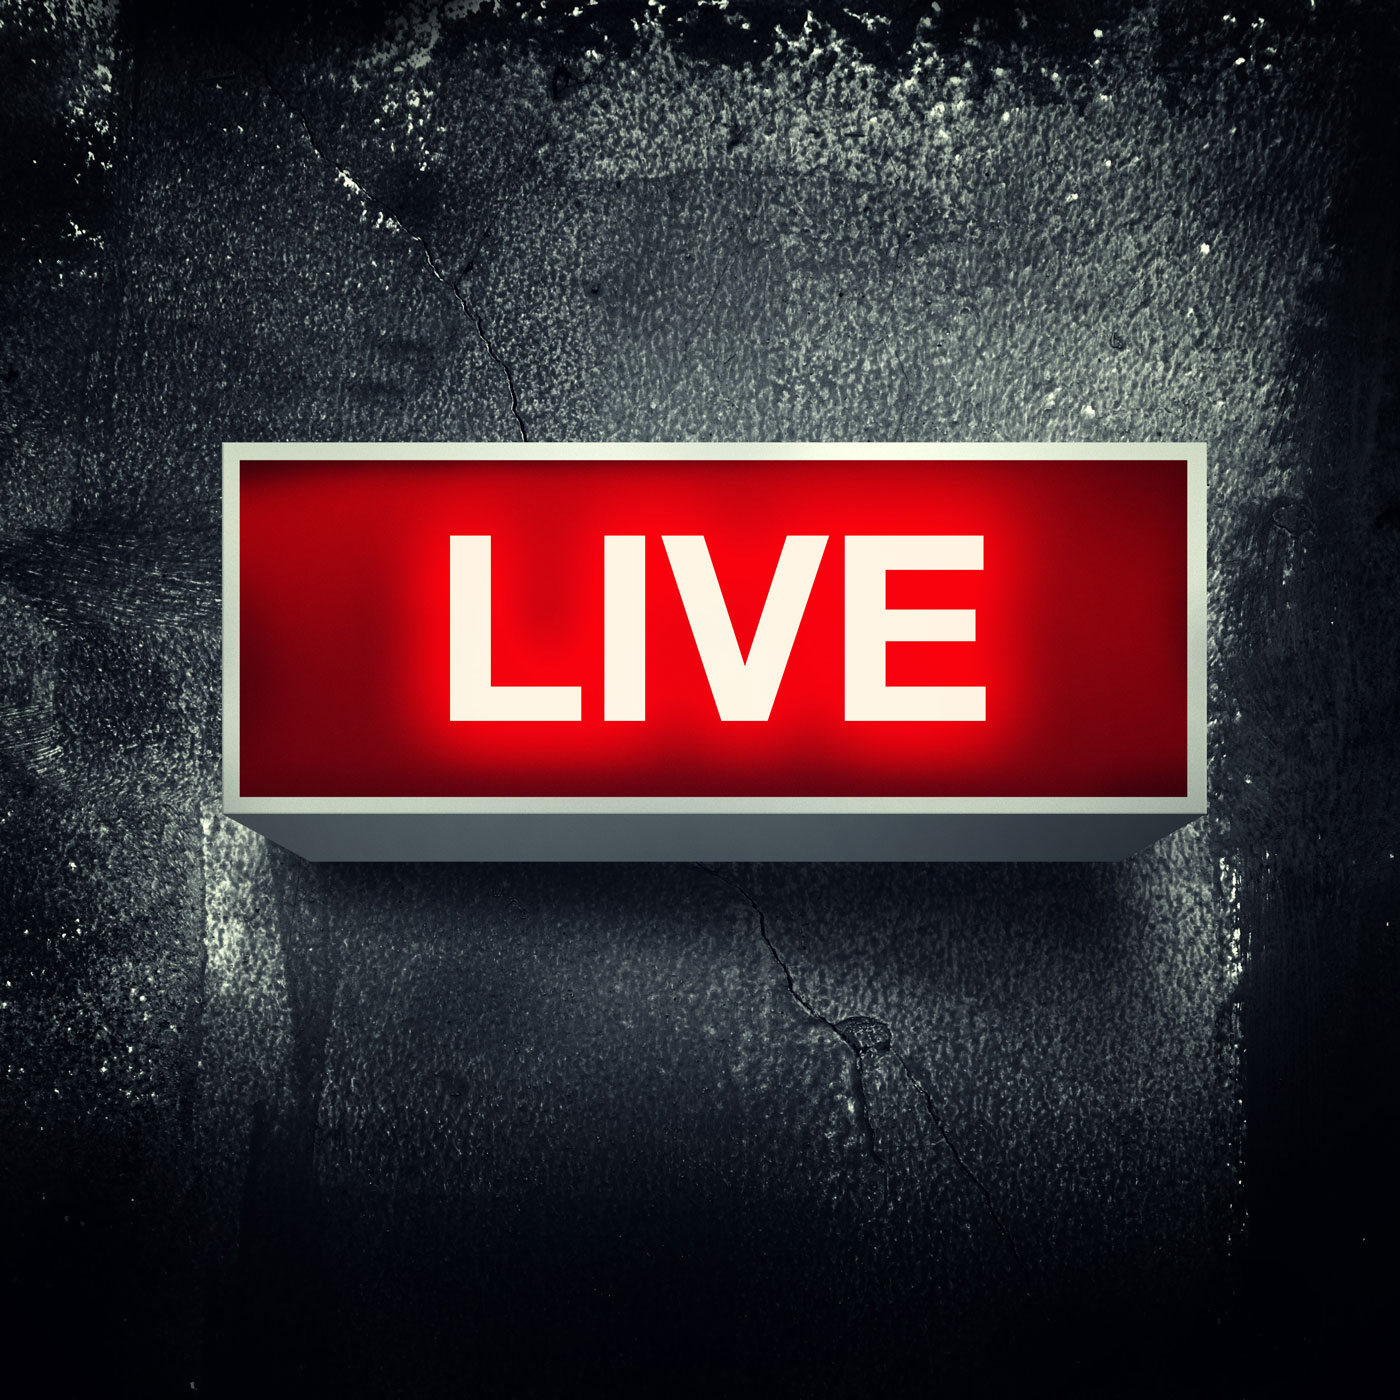 Tips-for-Live-Streaming-Shows-on-Periscope-Blab-YouTube-Live ...